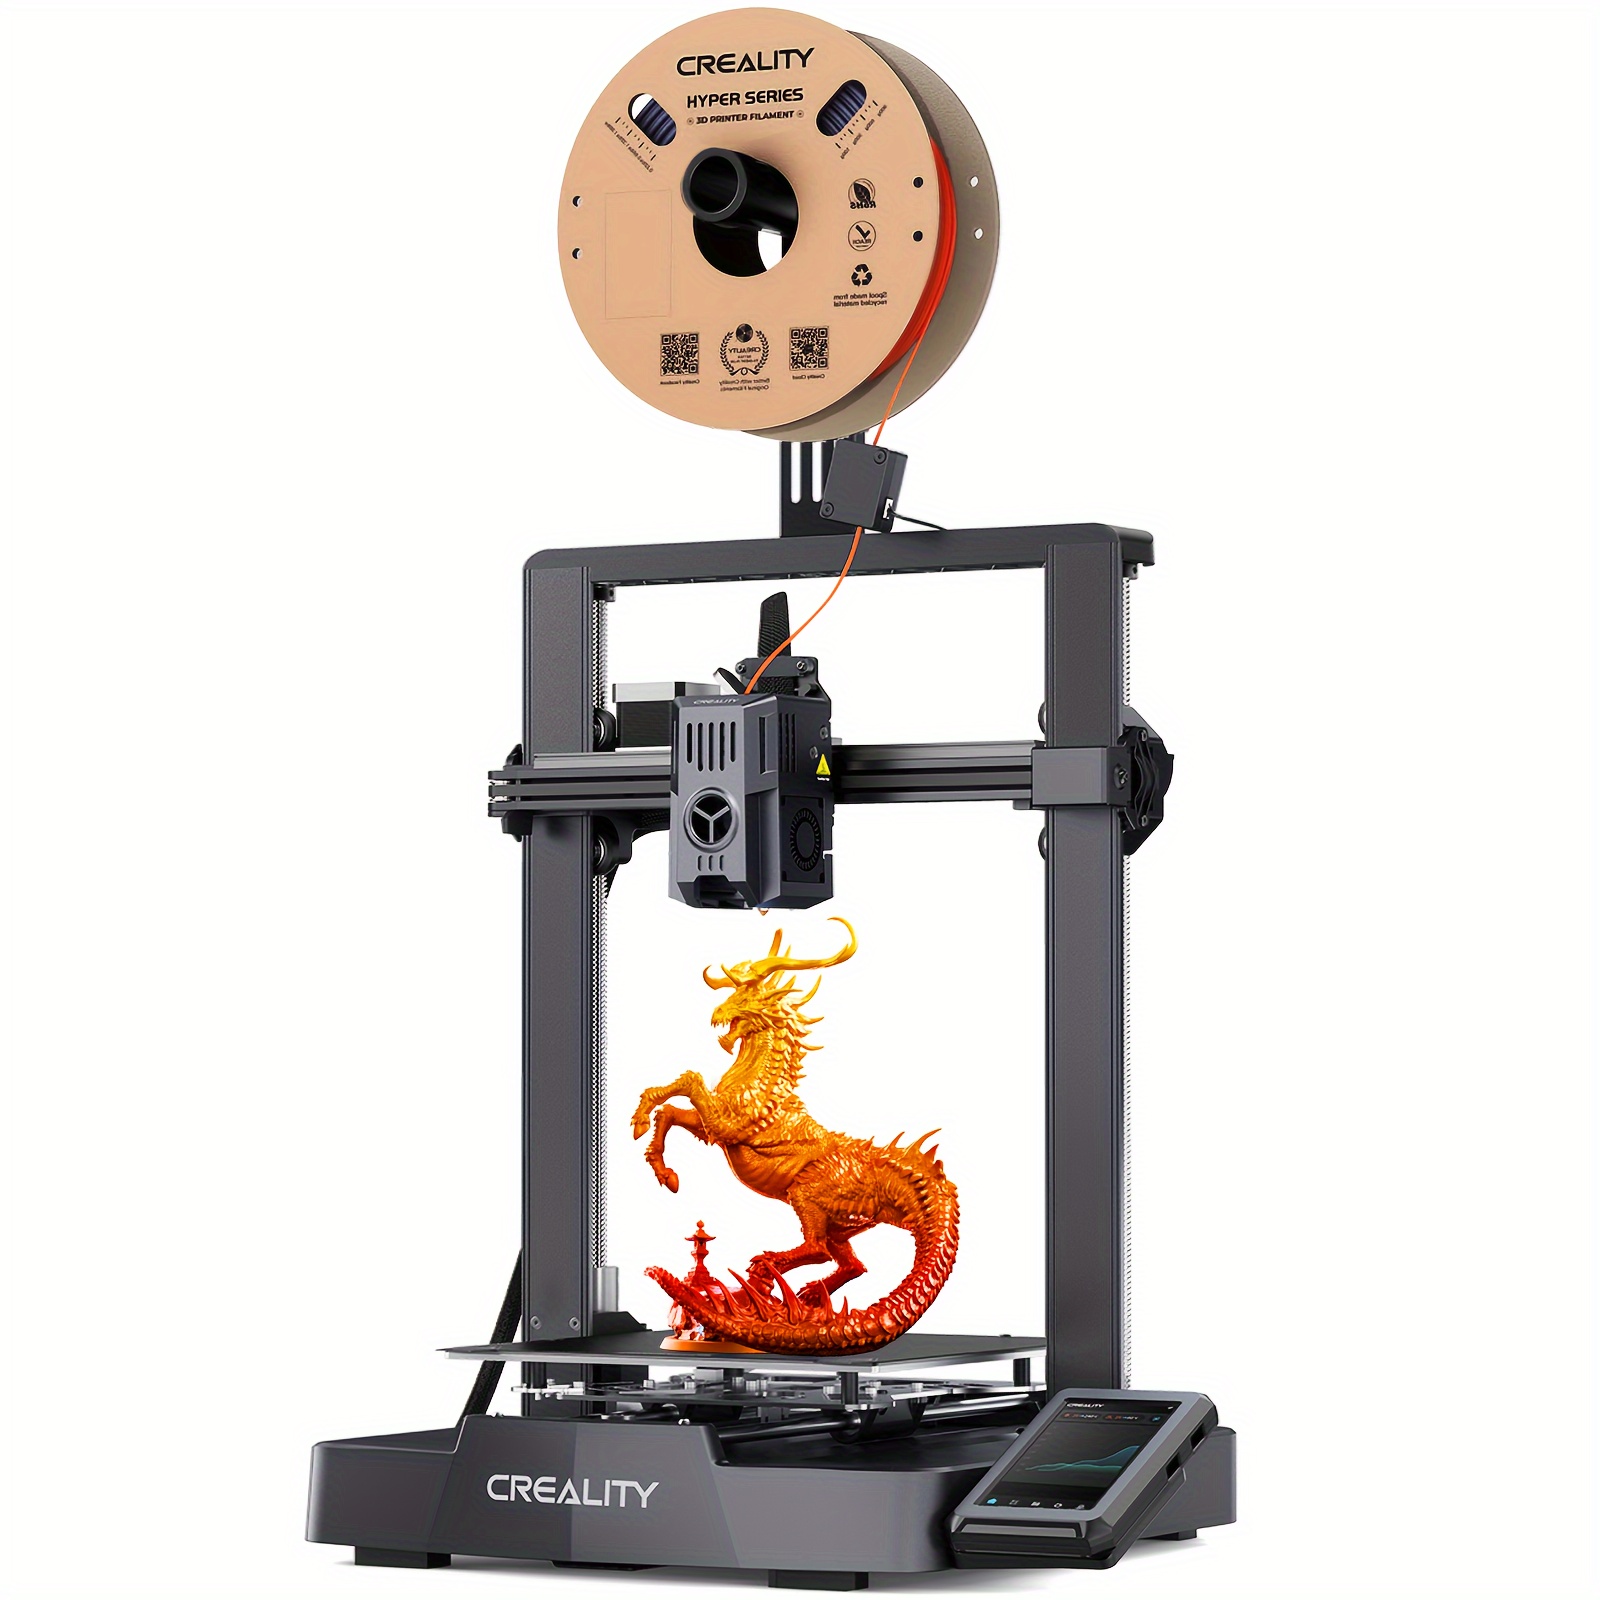 

Creality 3 V3 Ke 3d Printer 500mm/ S High- Speed Printing Smarter And Faster Cr Touch Auto Leveling Direct Drive Extruder Superior Ceramic Hotend X-axis Linear Rail Print Size 8.66* 8.66* 9.84in